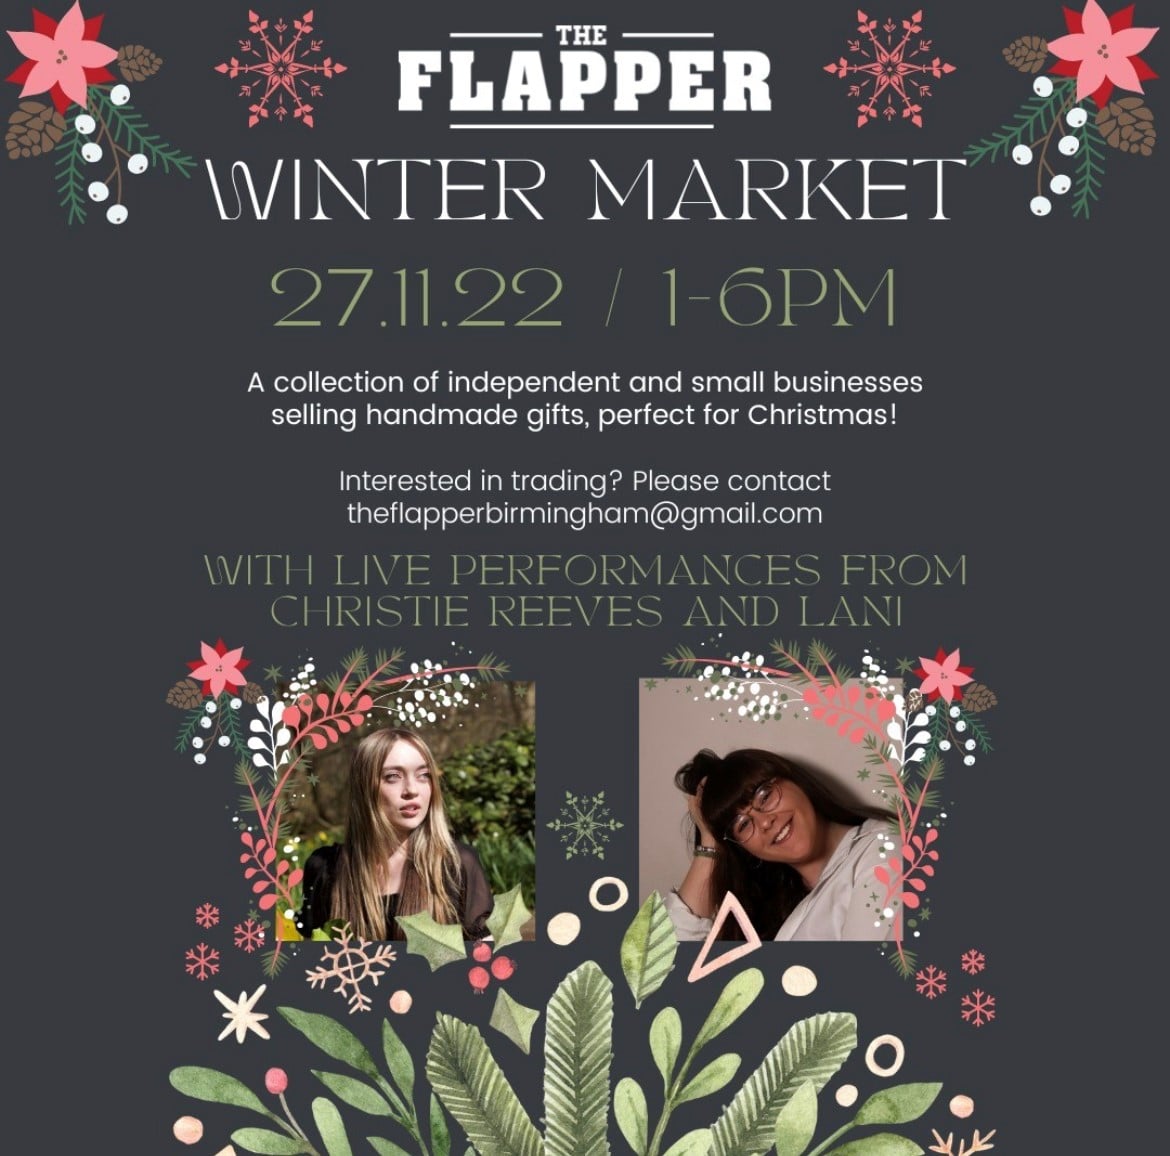 The Flapper Winter Market poster, with details of event